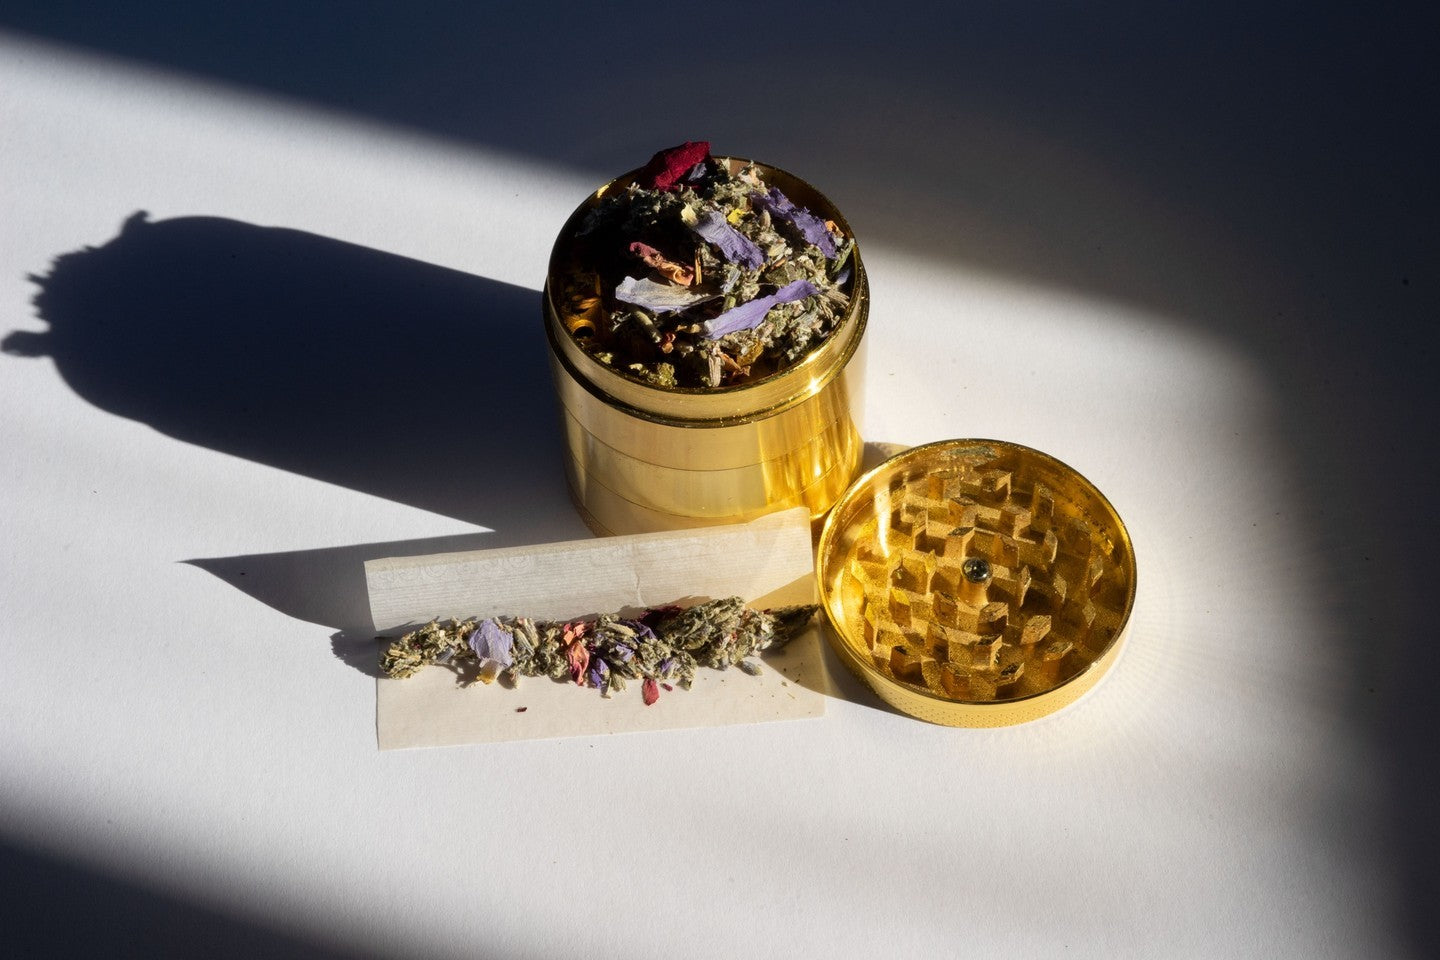 Barbari smoking herbs with gold grinder with rolling paper and long shadows